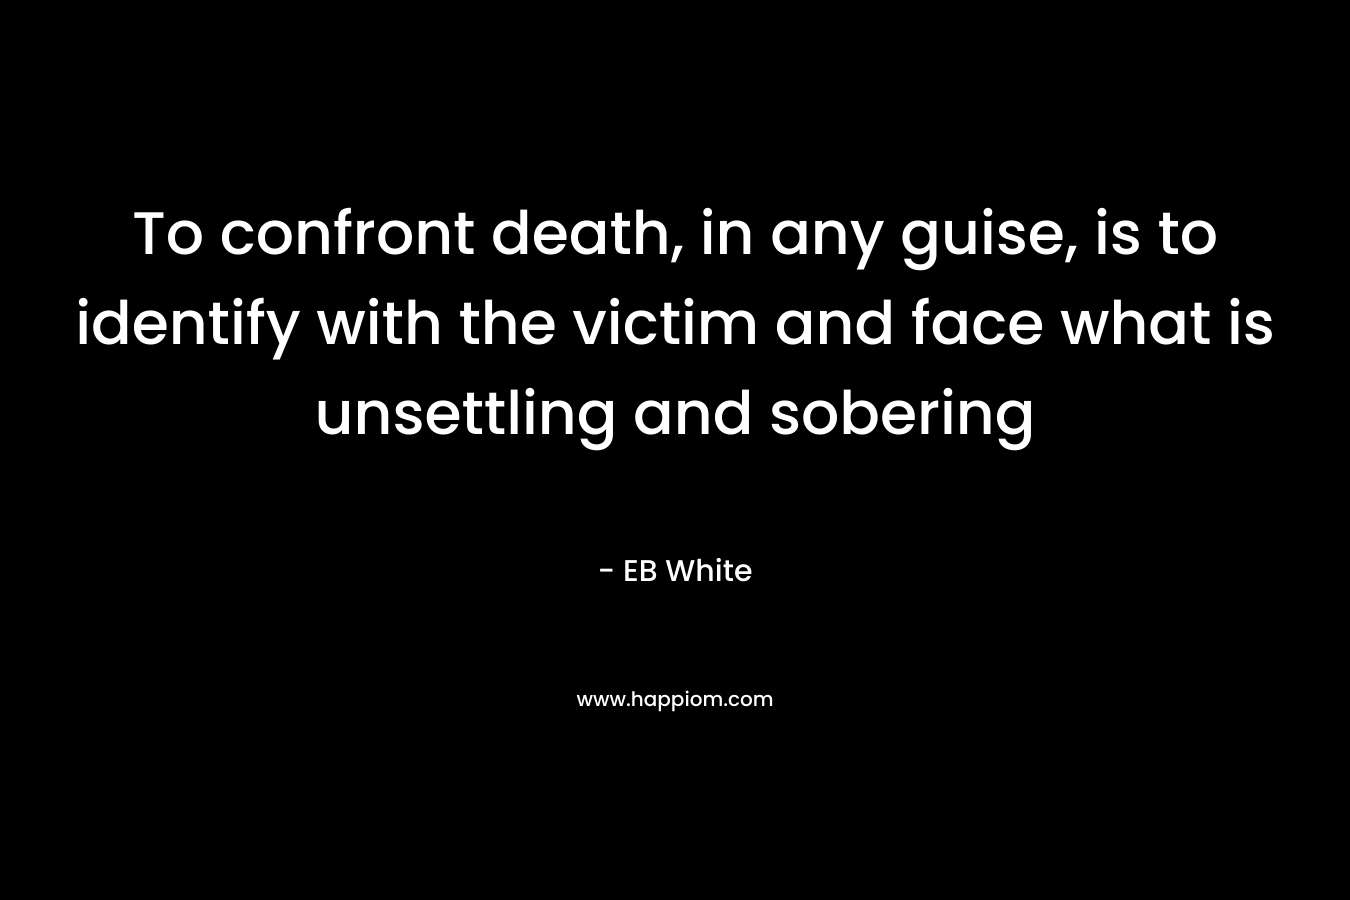 To confront death, in any guise, is to identify with the victim and face what is unsettling and sobering